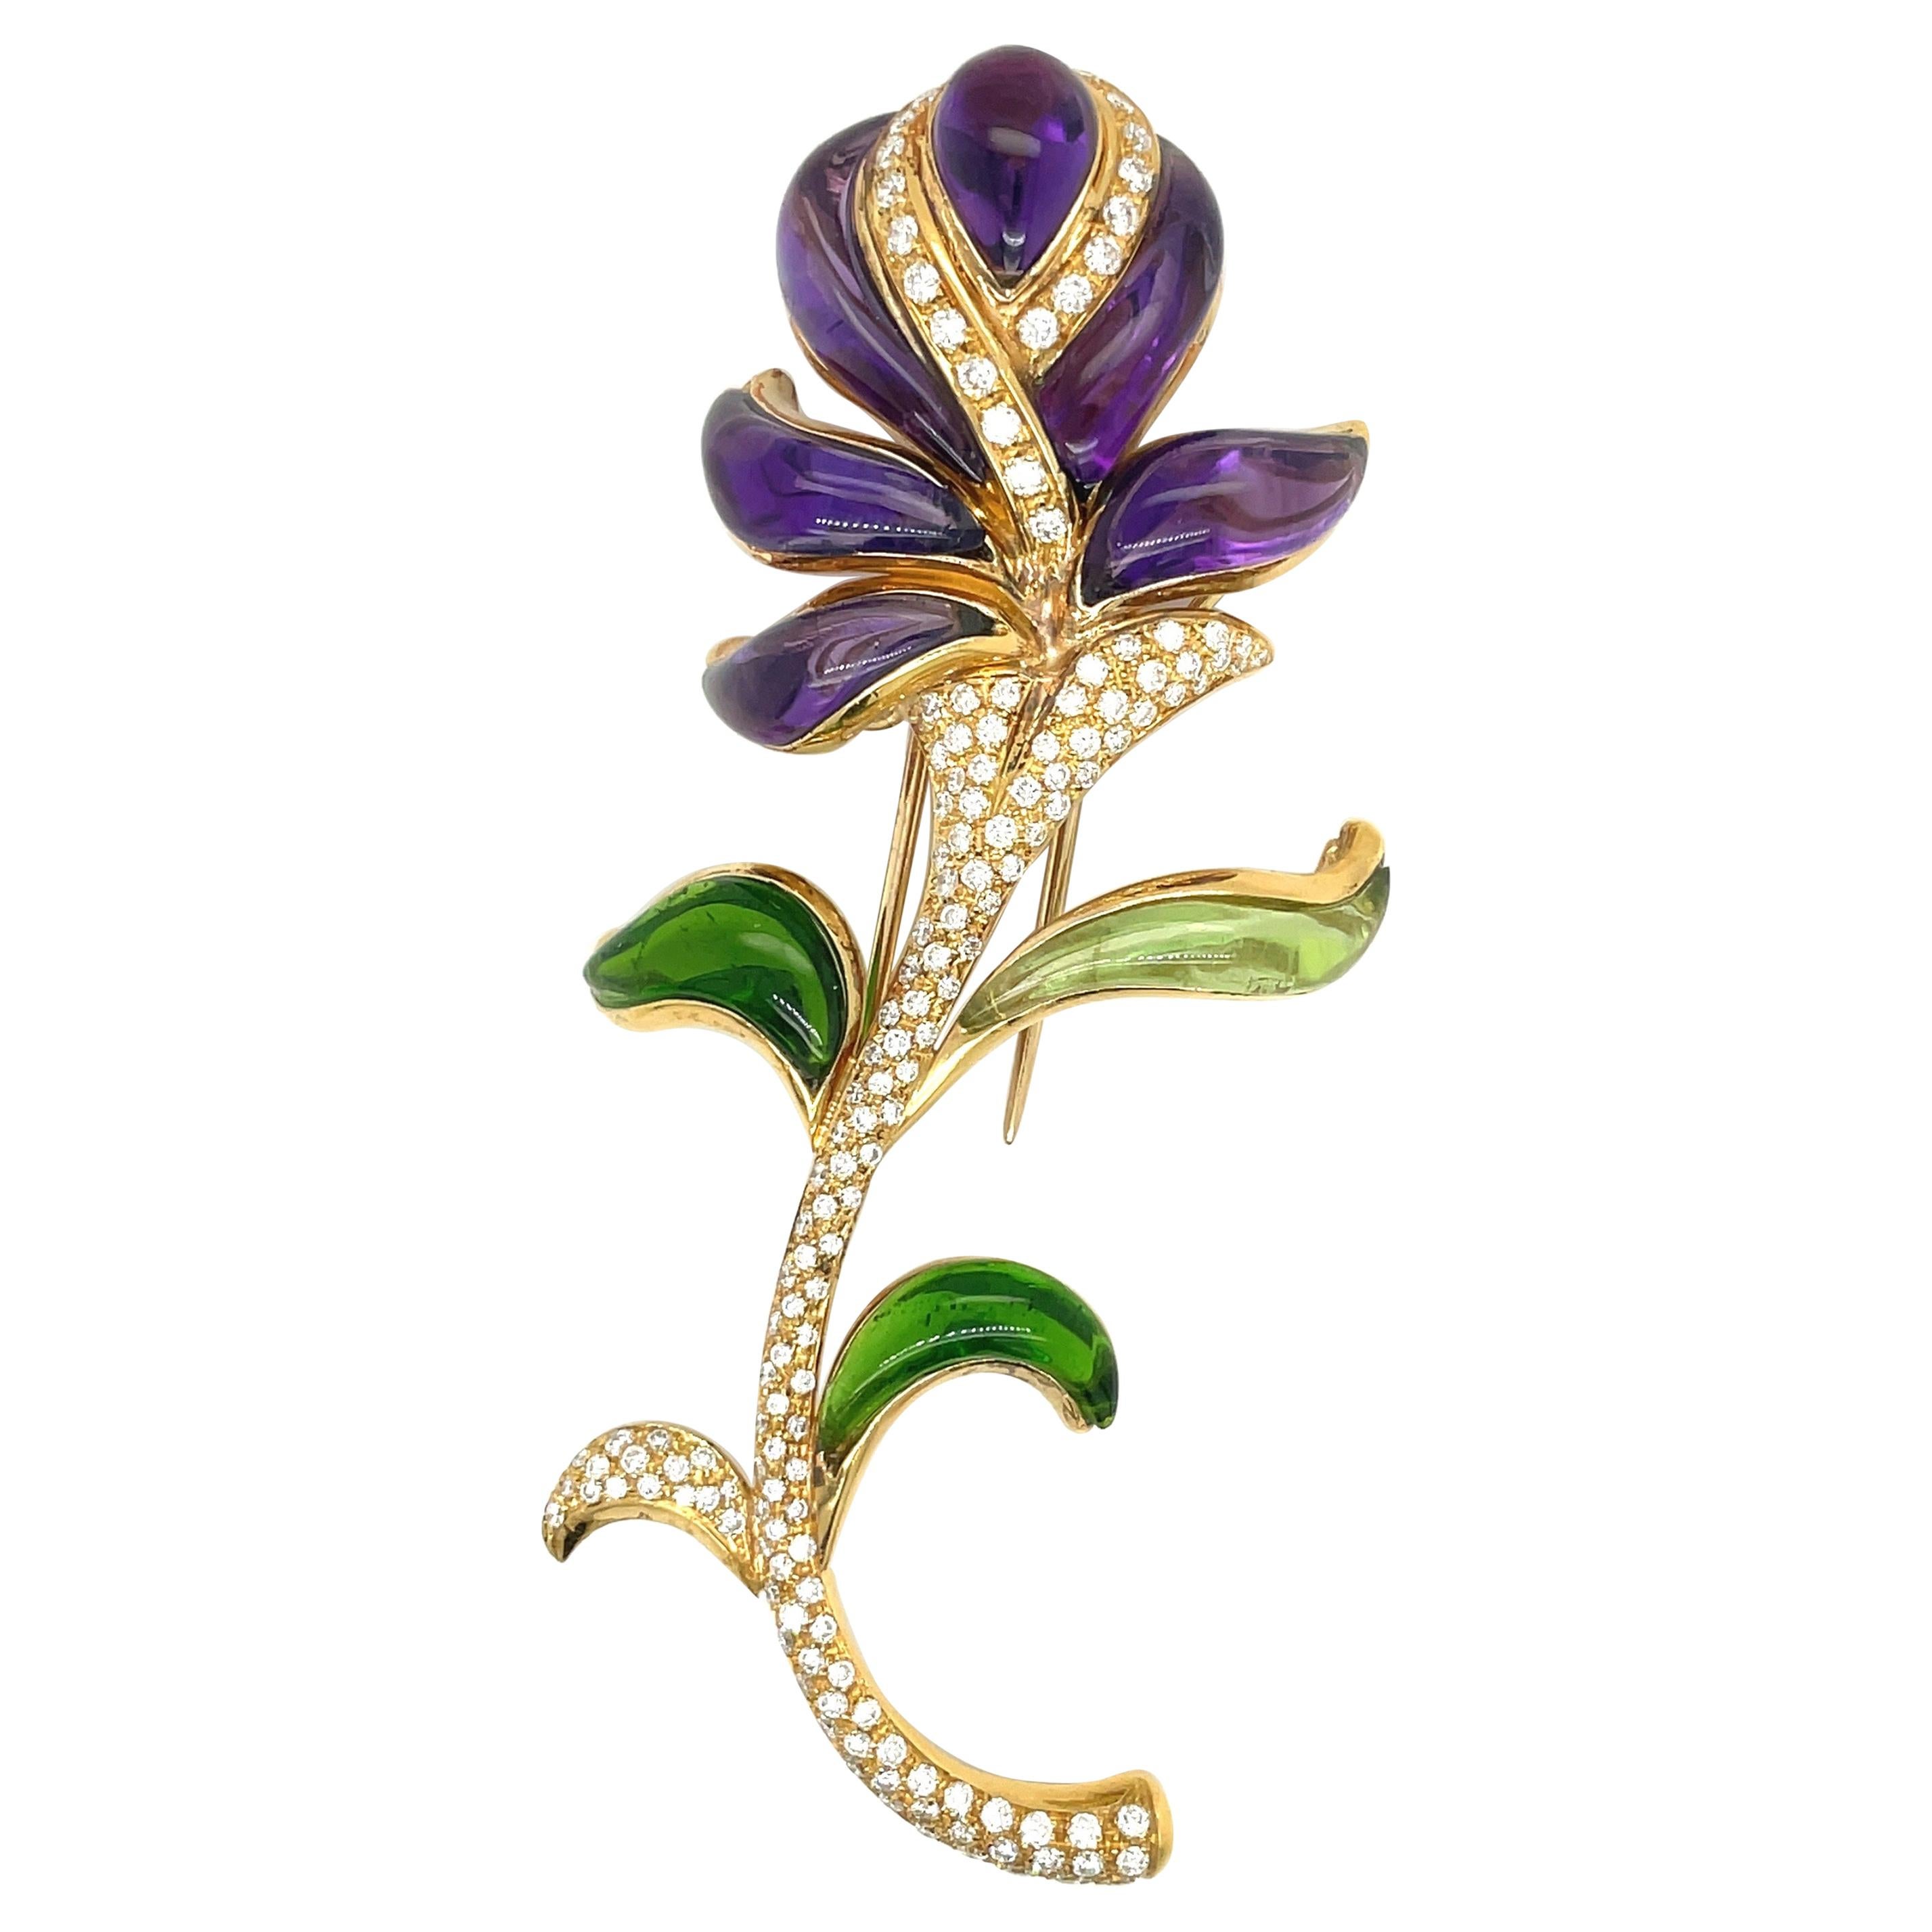 Roberto Casarin 18k Gold Cabochon Amethyst, Green Tourmaline and Diamond Brooch For Sale